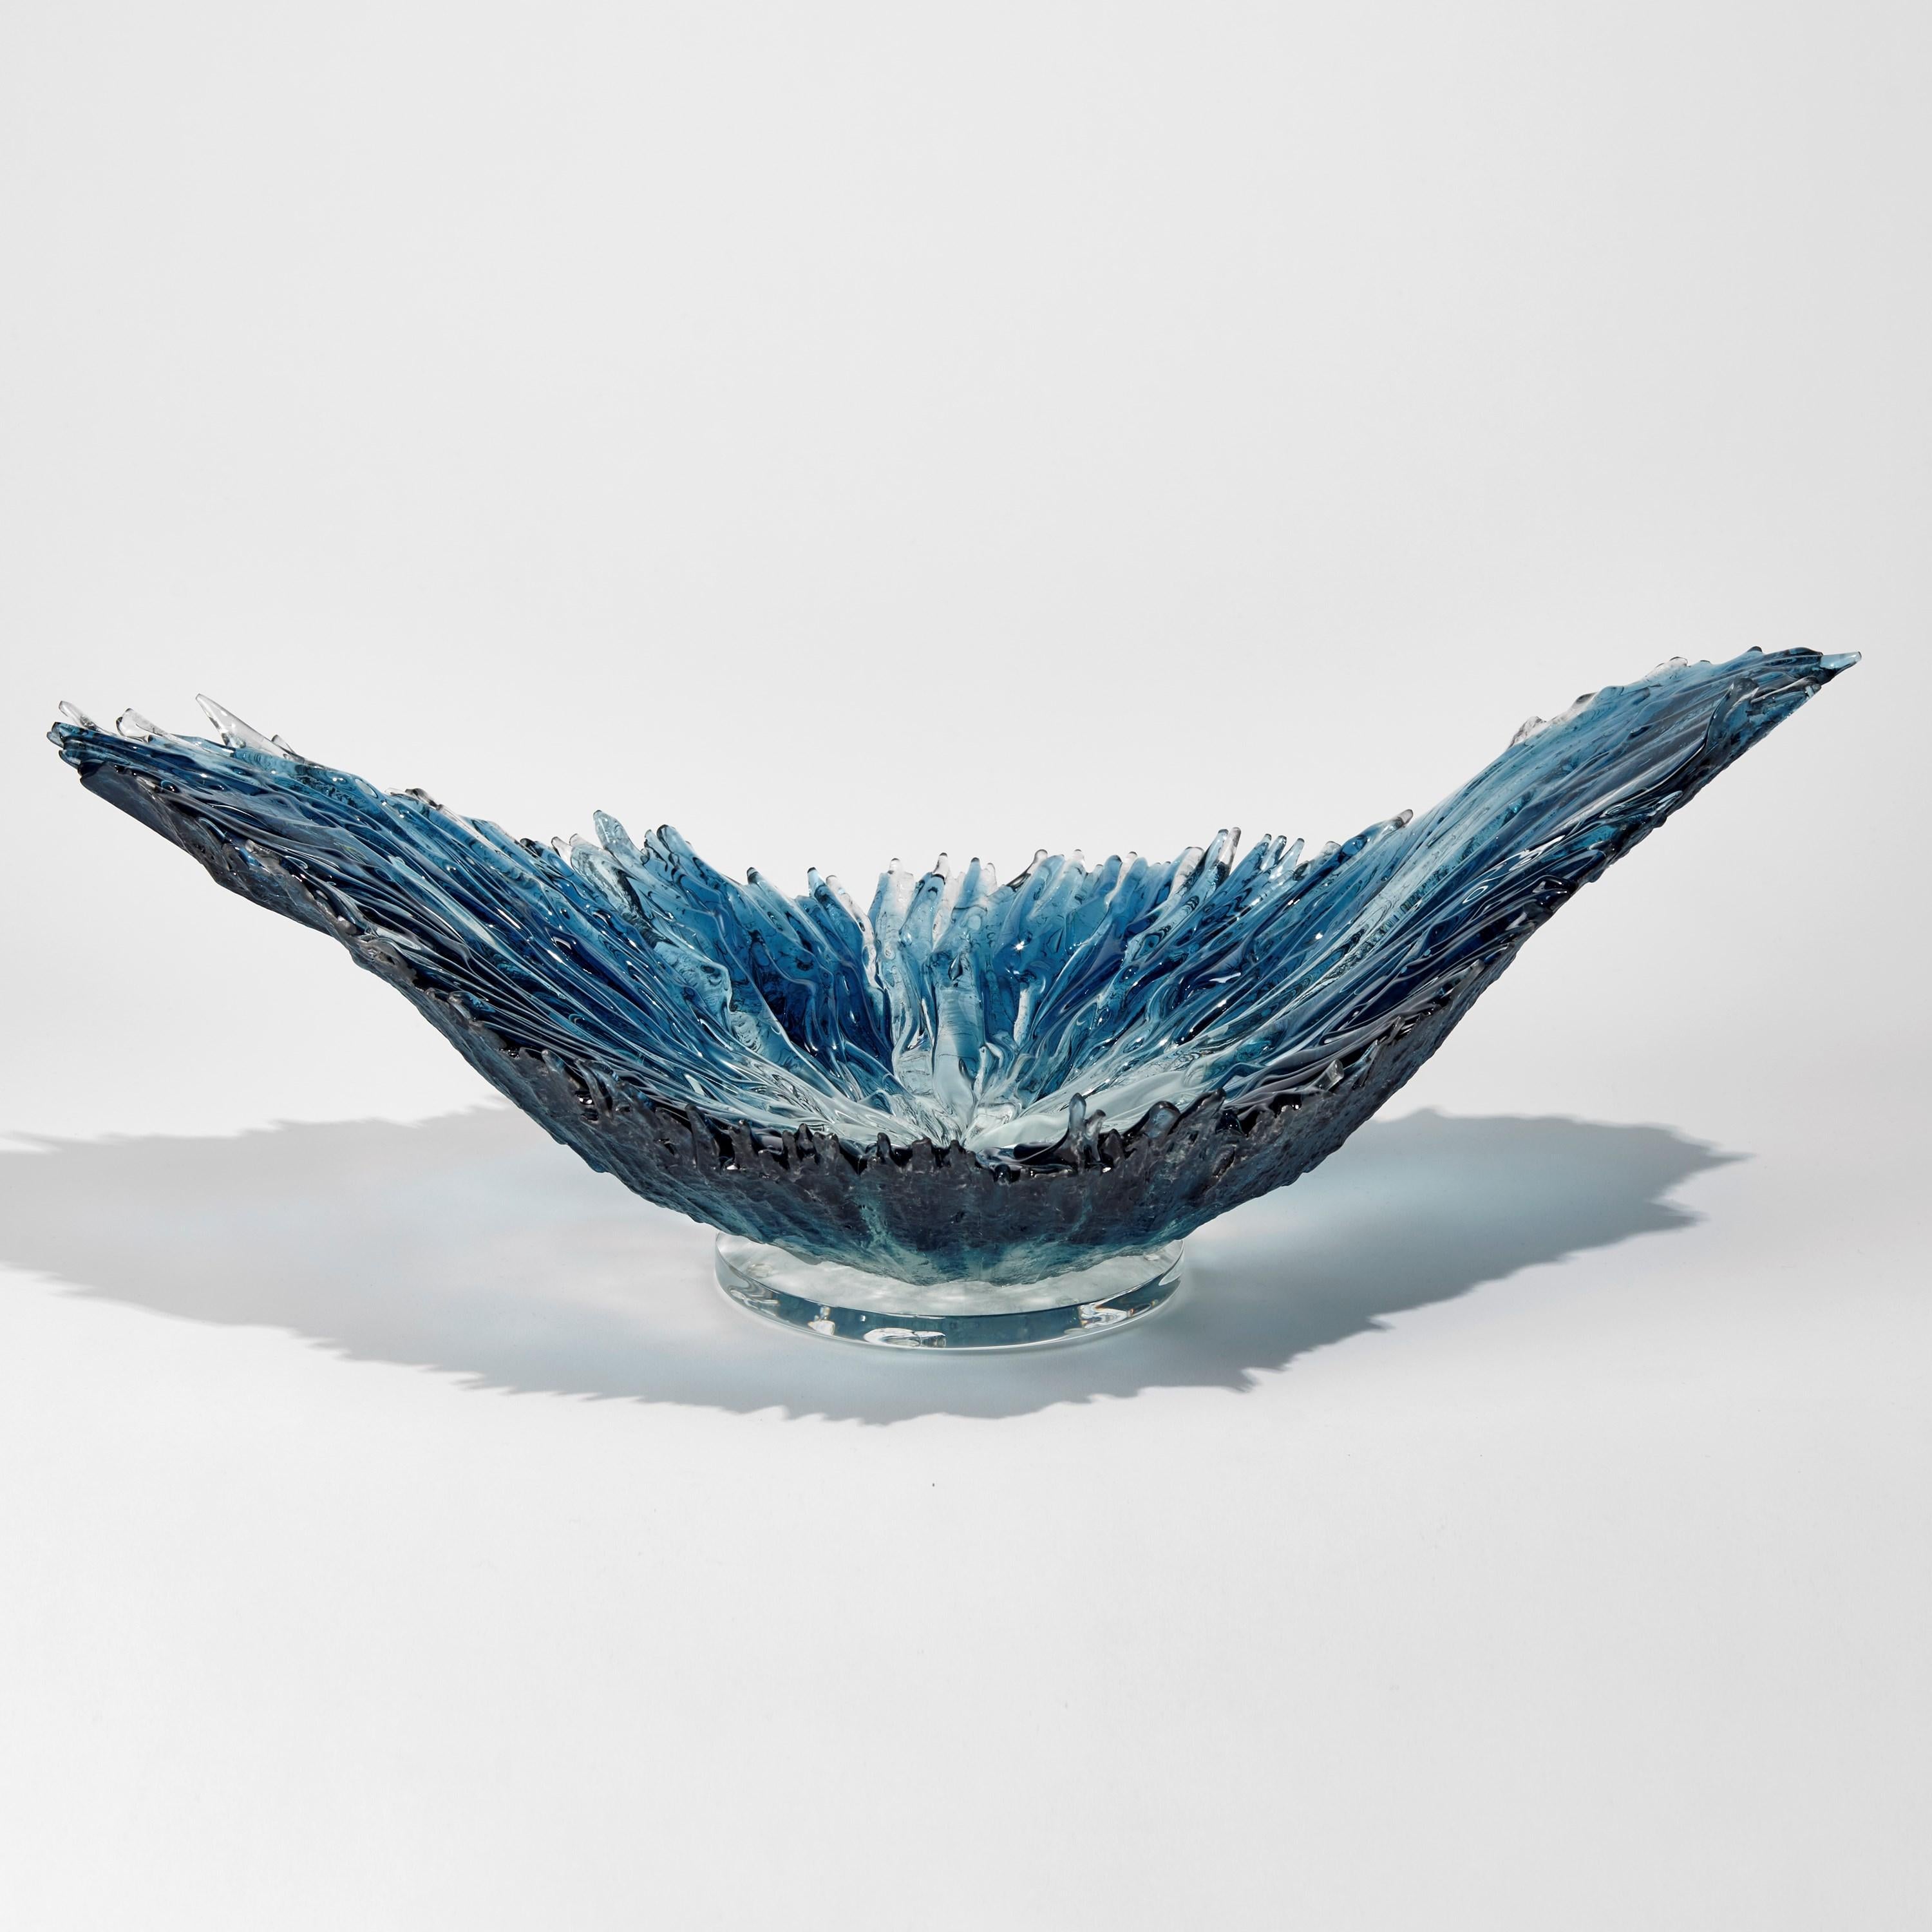 Oval Coral Bowl in Aqua is a blue / turquoise / aquamarine and clear glass organic centrepiece / bowl by the British artist Wayne Charmer. Combining drama, movement and scale, the glass resembles an impact splash in to water, simply stunning. It is